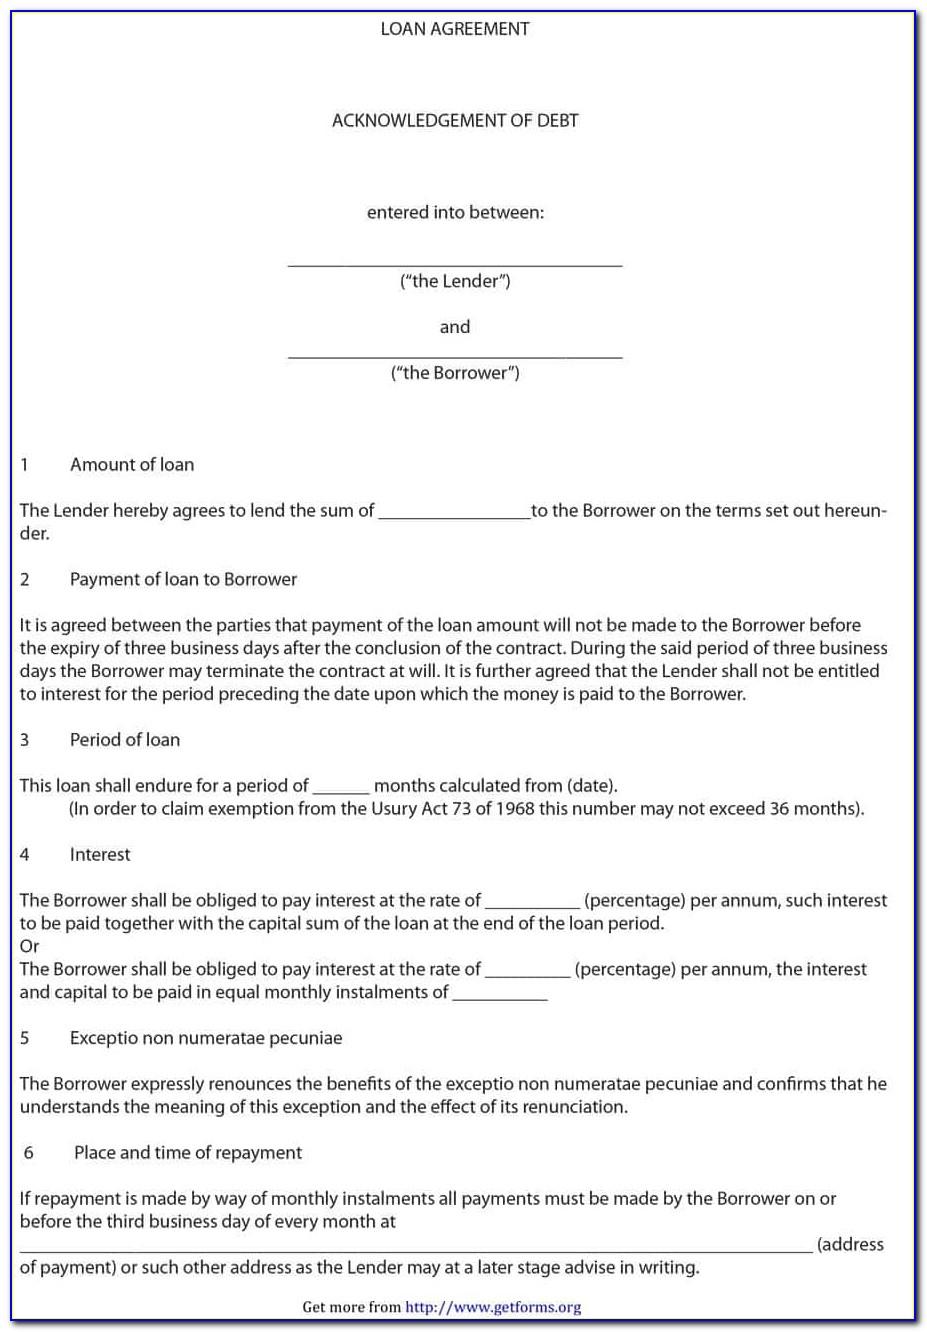 Private Mortgage Document Example